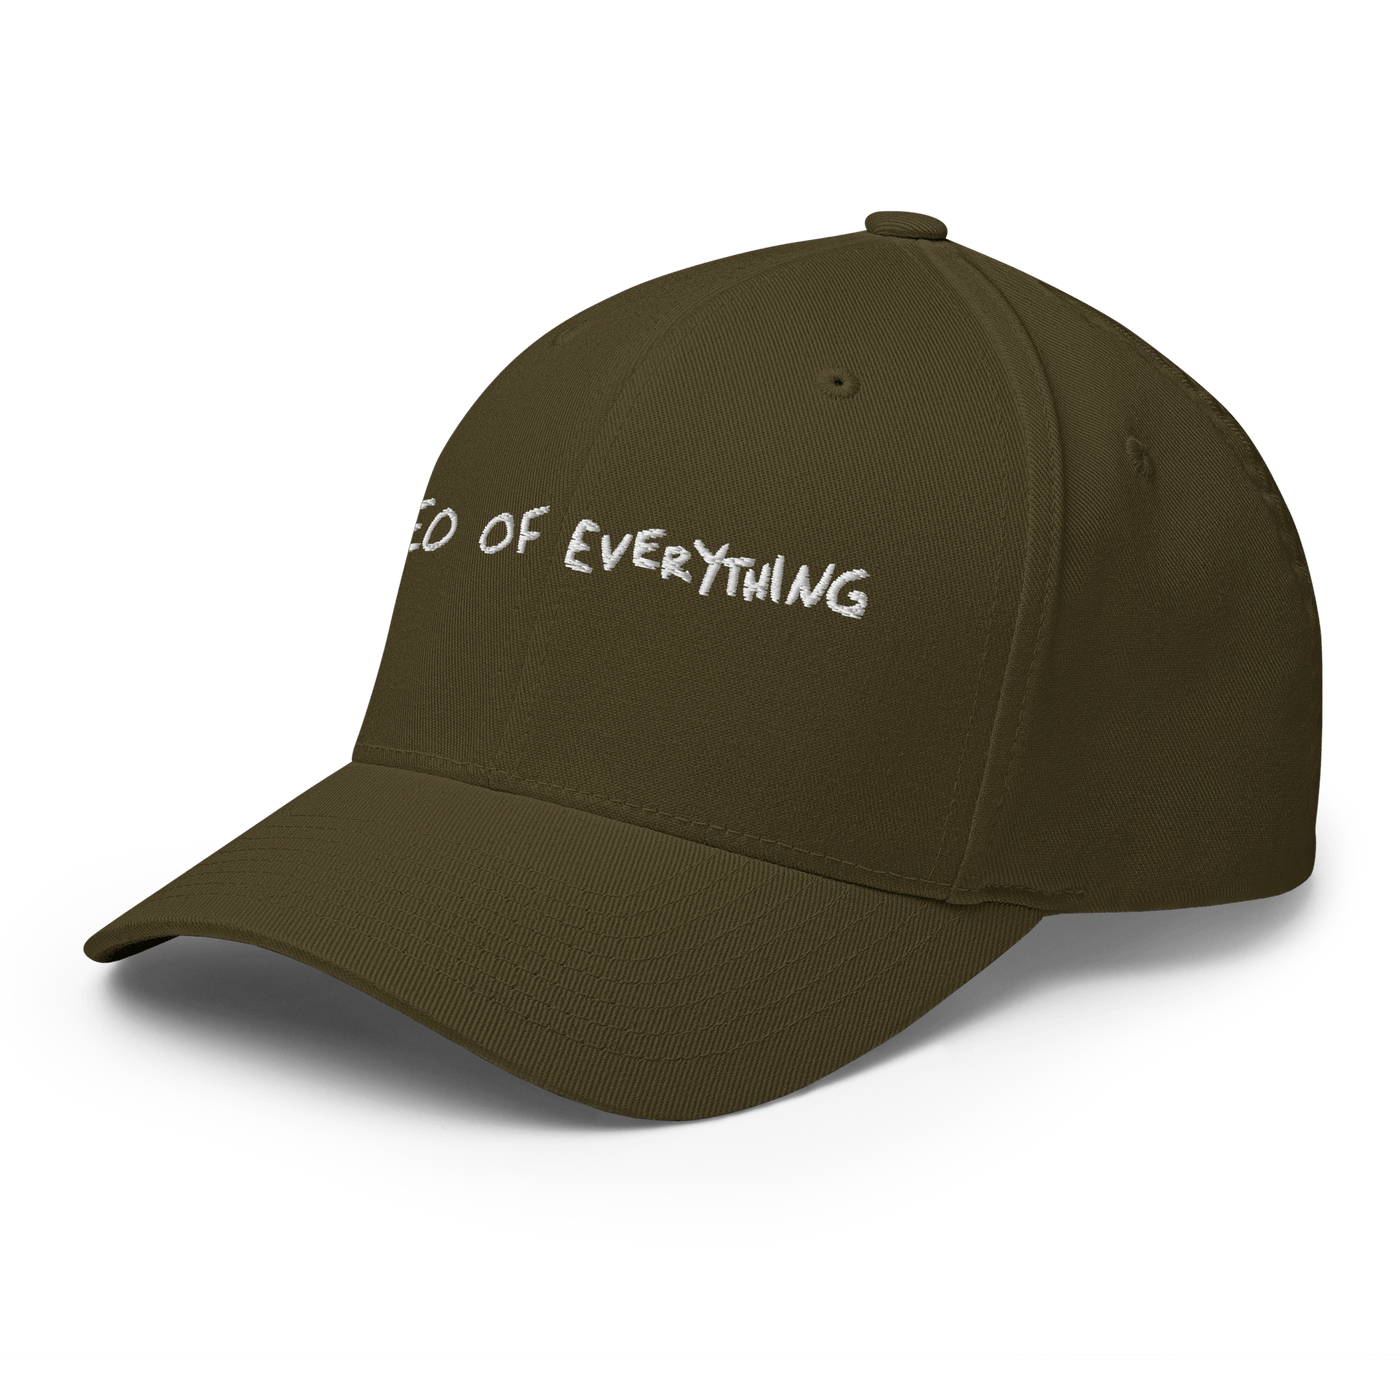 CEO of everything Flexfit cap - Olive - S/M - Just Another Cap Store